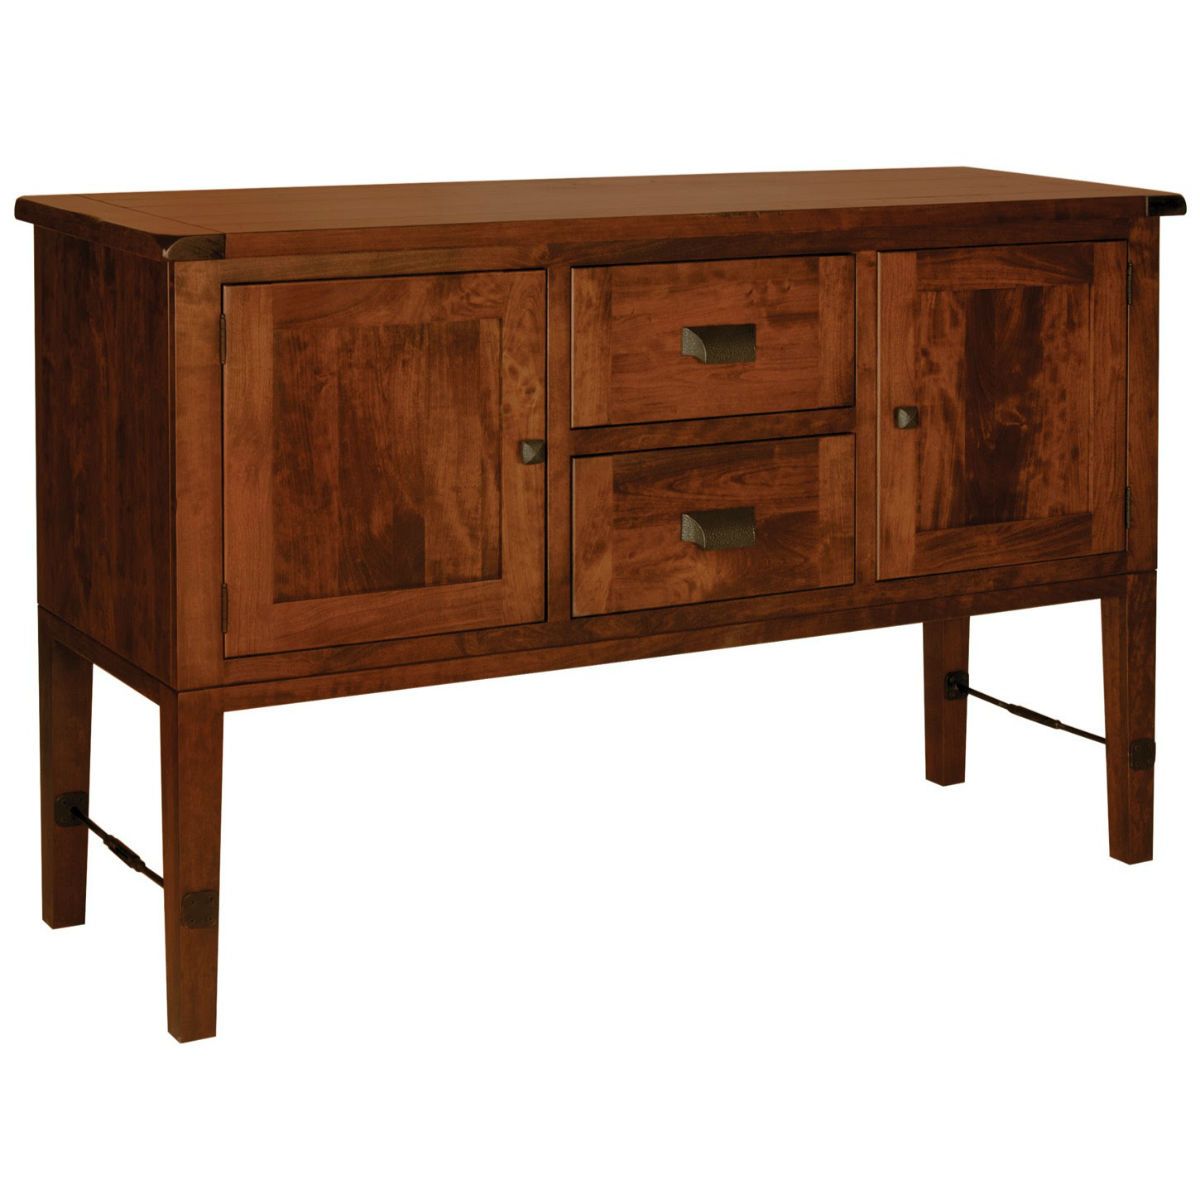 Holbrooke Rustic Cherry Wood Buffet, Michaels Stain